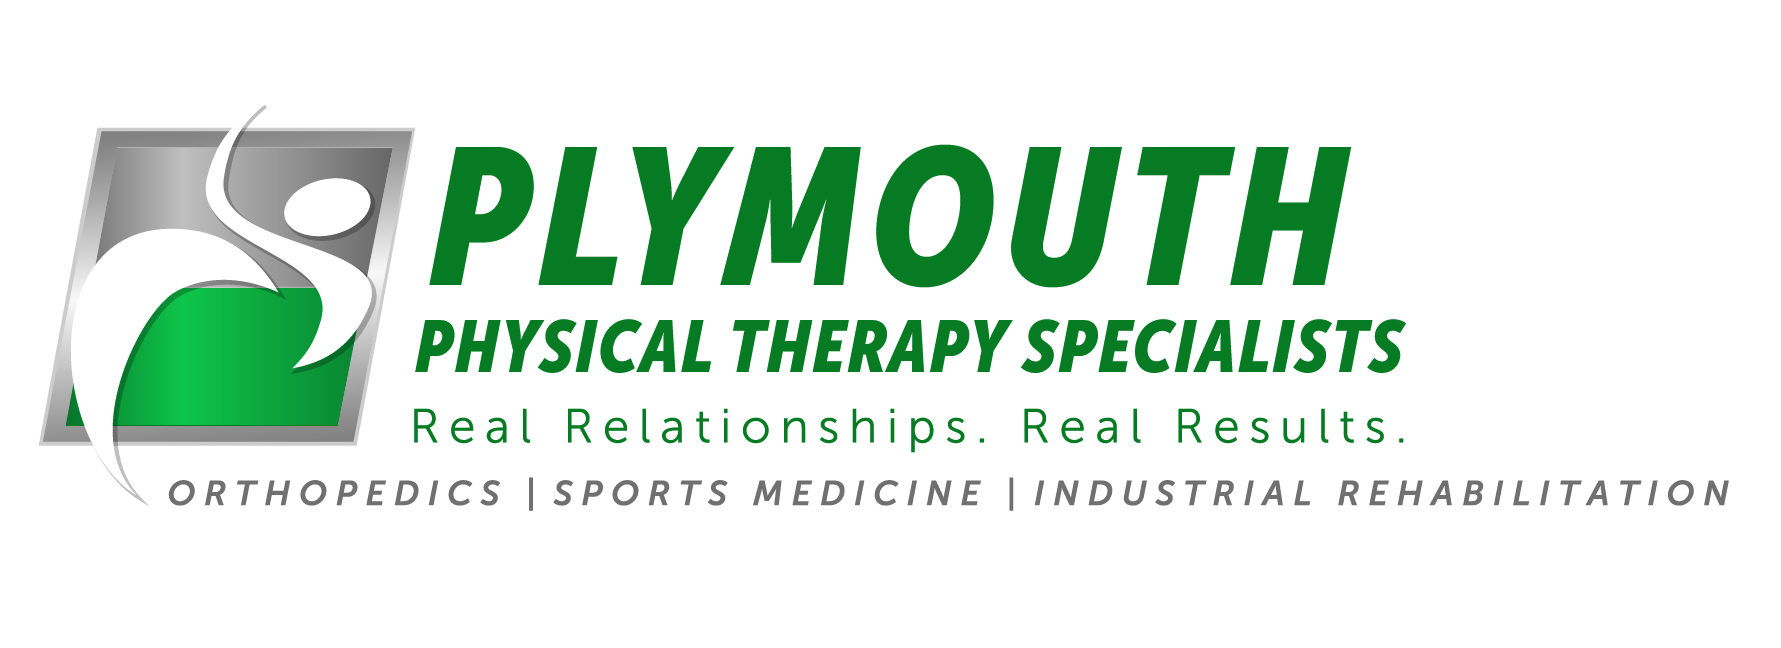 Plymouth Physical Therapy Specialists